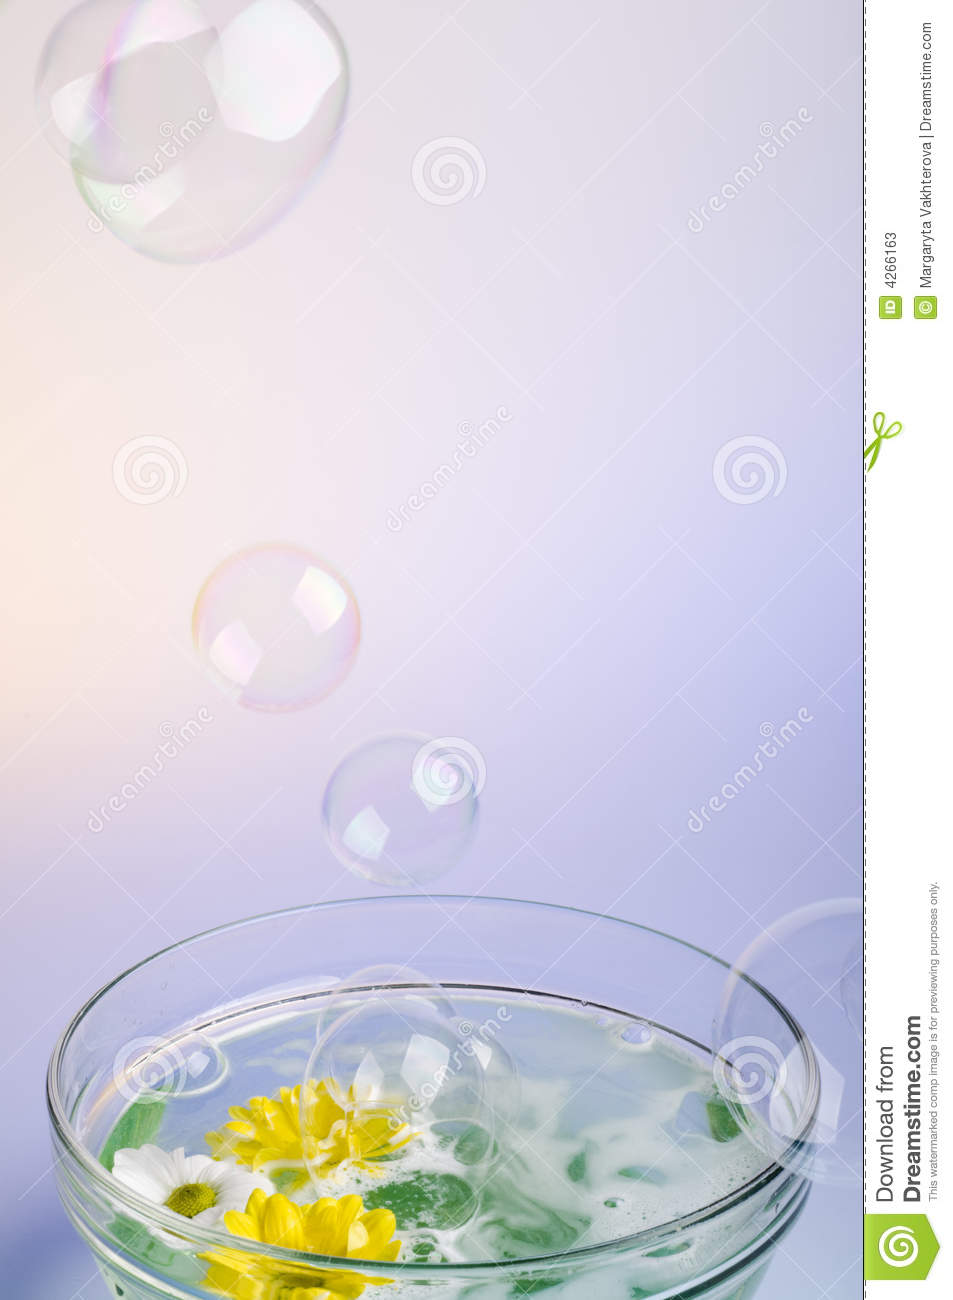 Bowl With Dissolved Sea Salt And Flowers  Stock Photos   Image